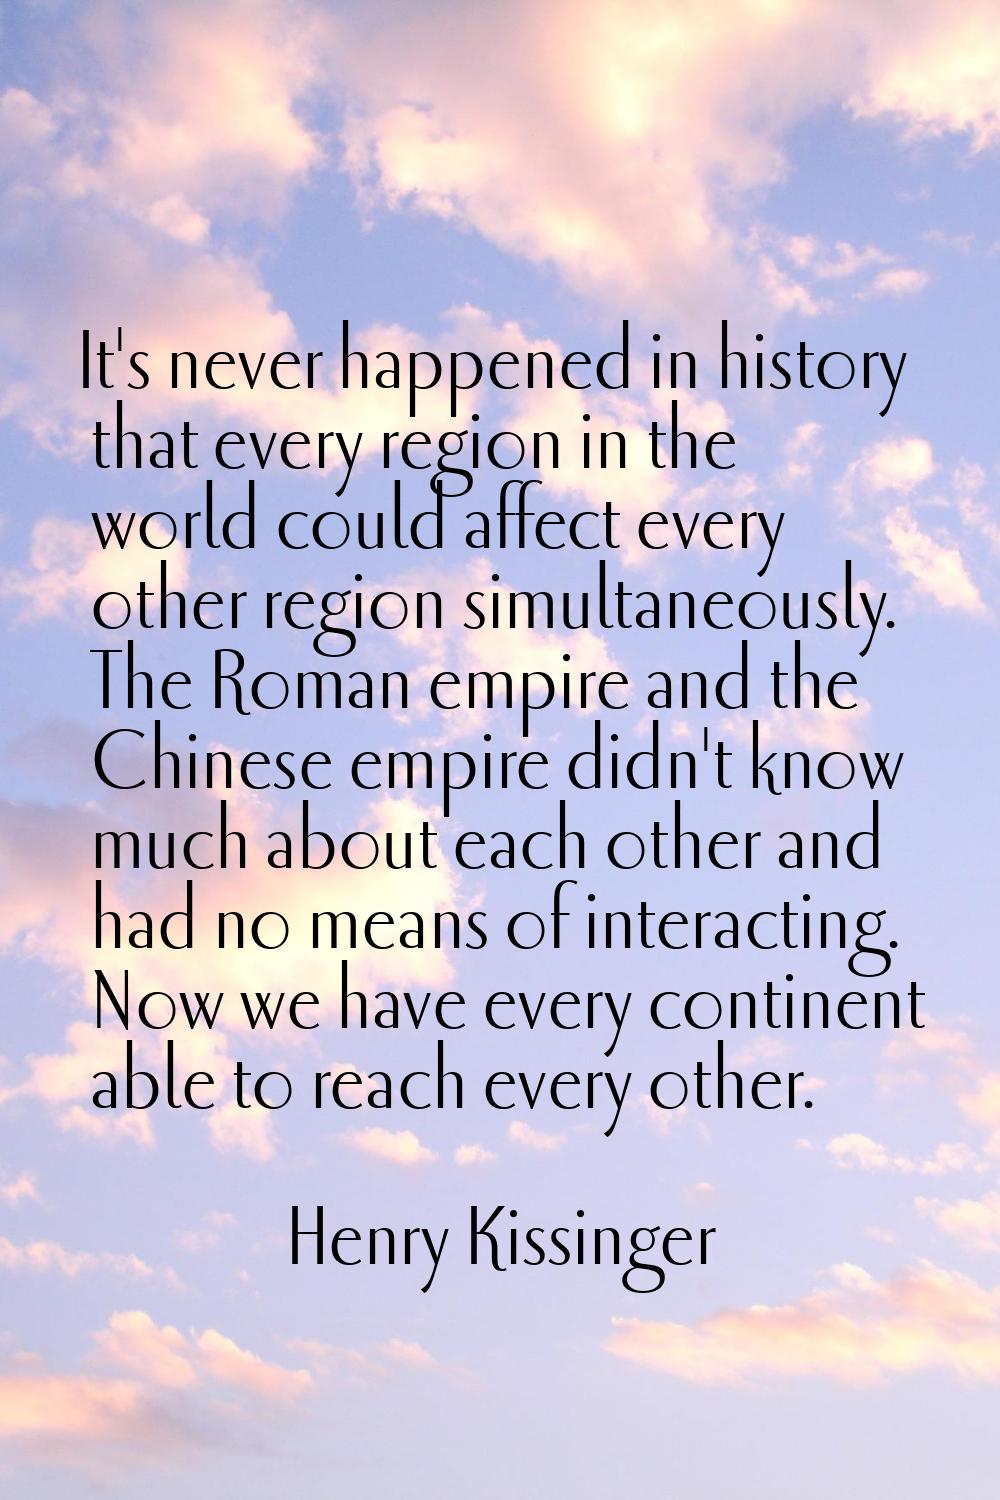 It's never happened in history that every region in the world could affect every other region simul